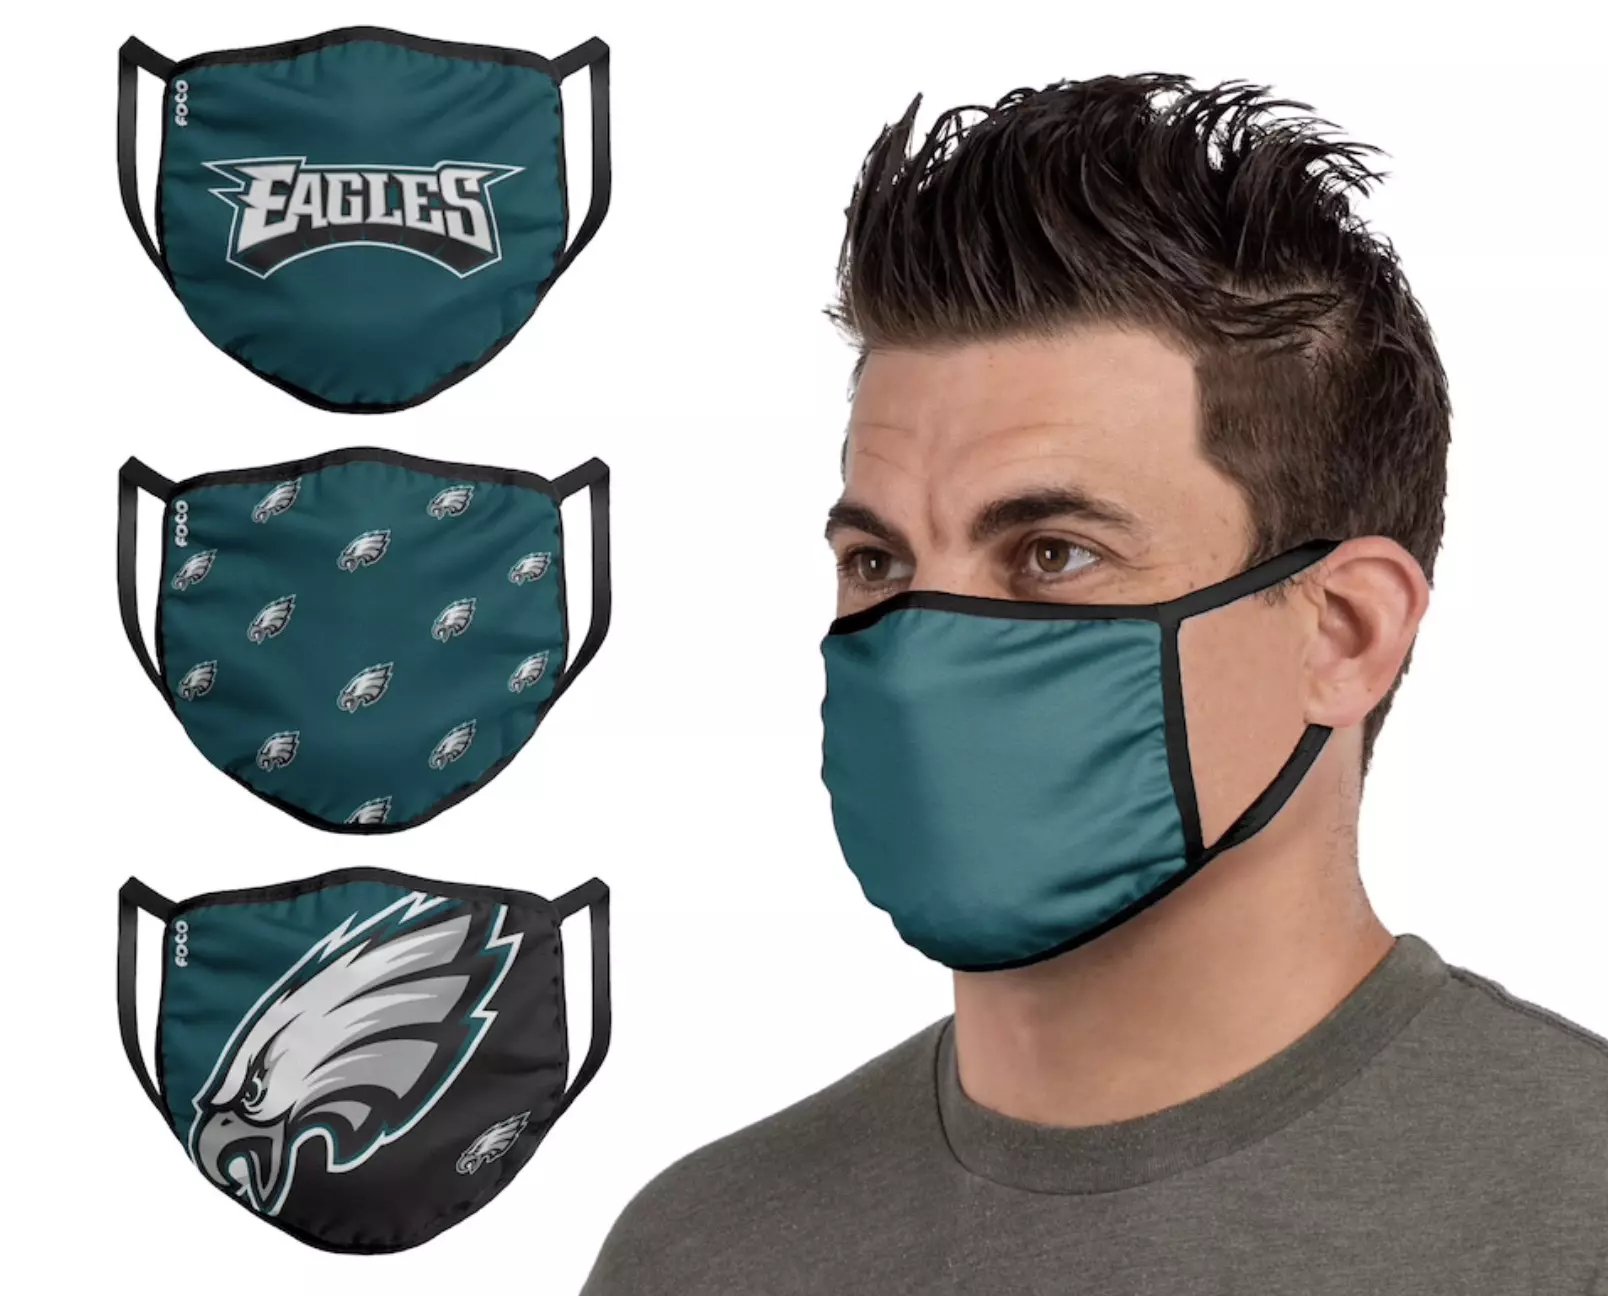 You Can Buy Face Masks with Your Team's Logo on Them